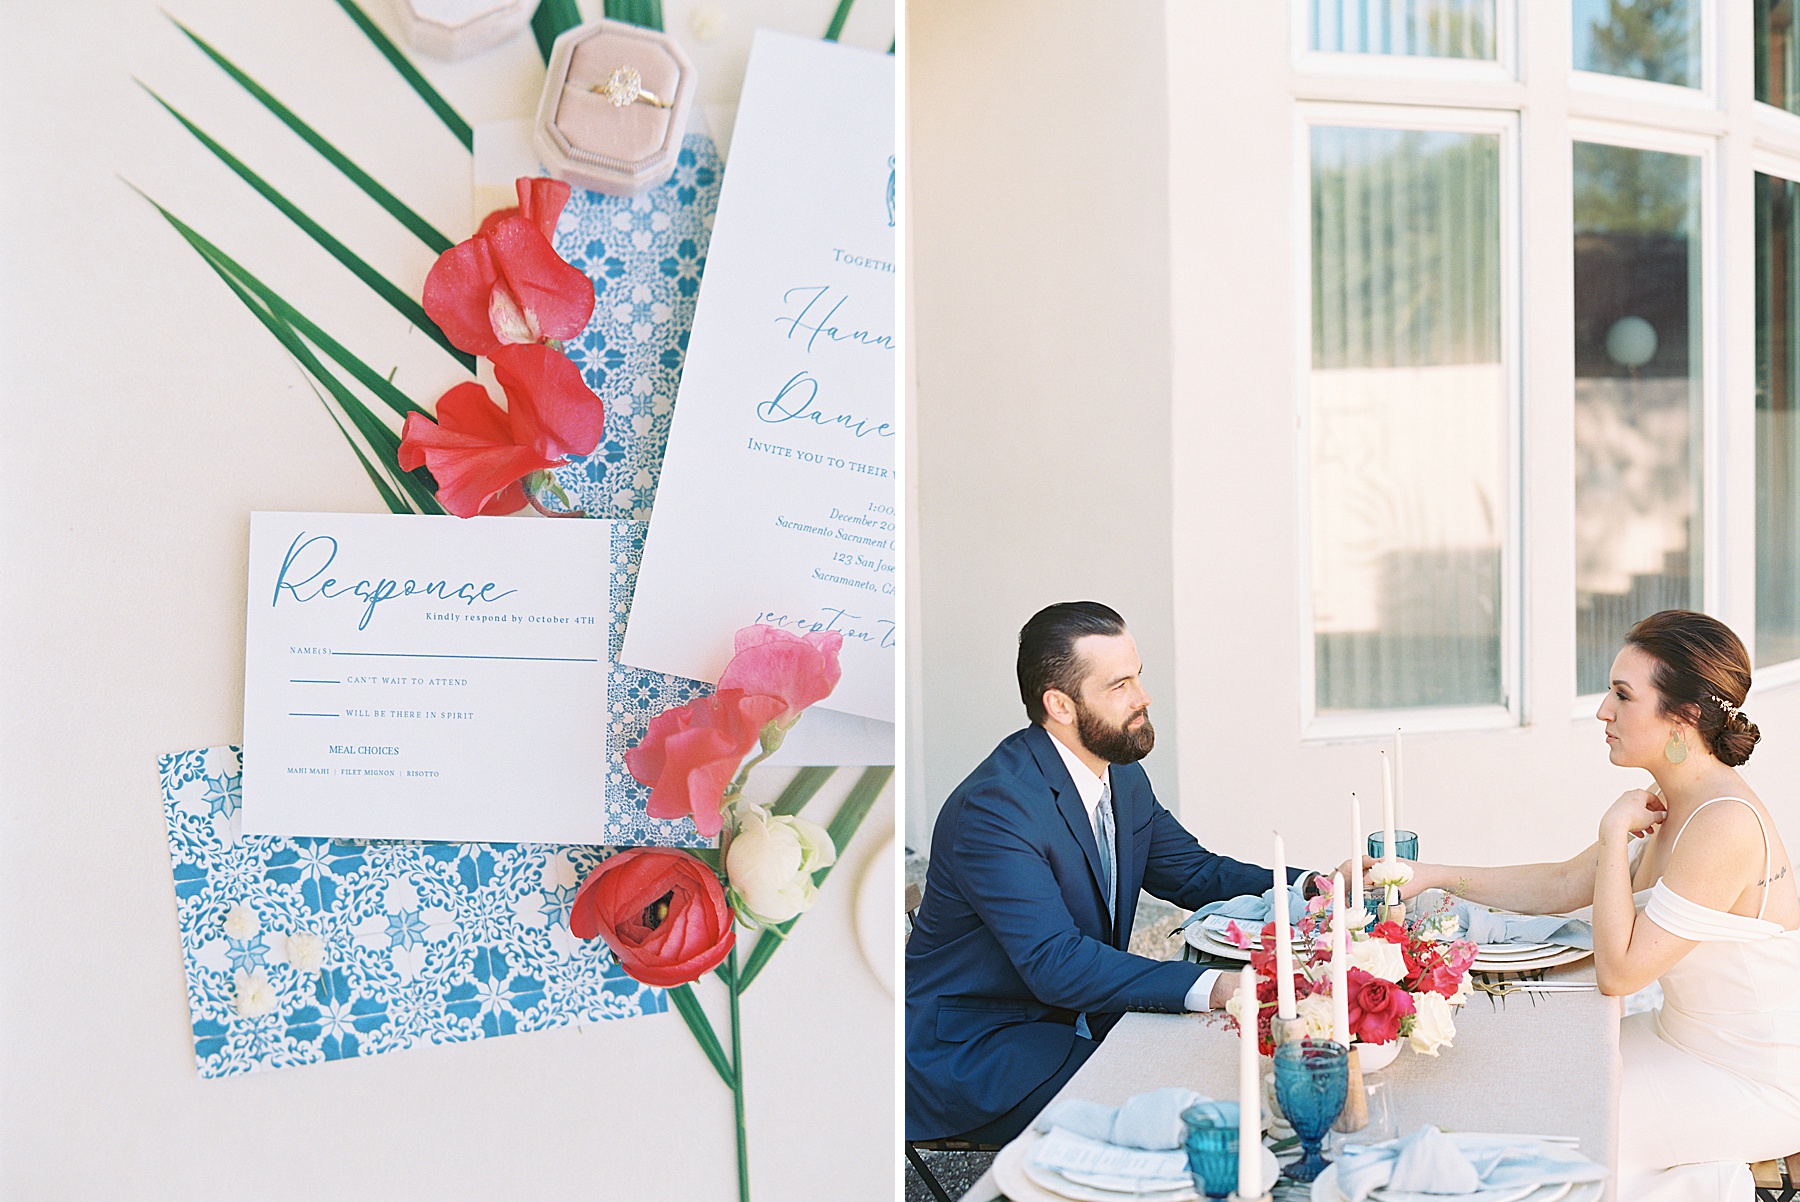 Grecian Inspired Micro-Wedding with Events by Kristina Elyse - Ash Baumgartner - Inspired by This - Sonoma Wedding Photographer_0027.jpg